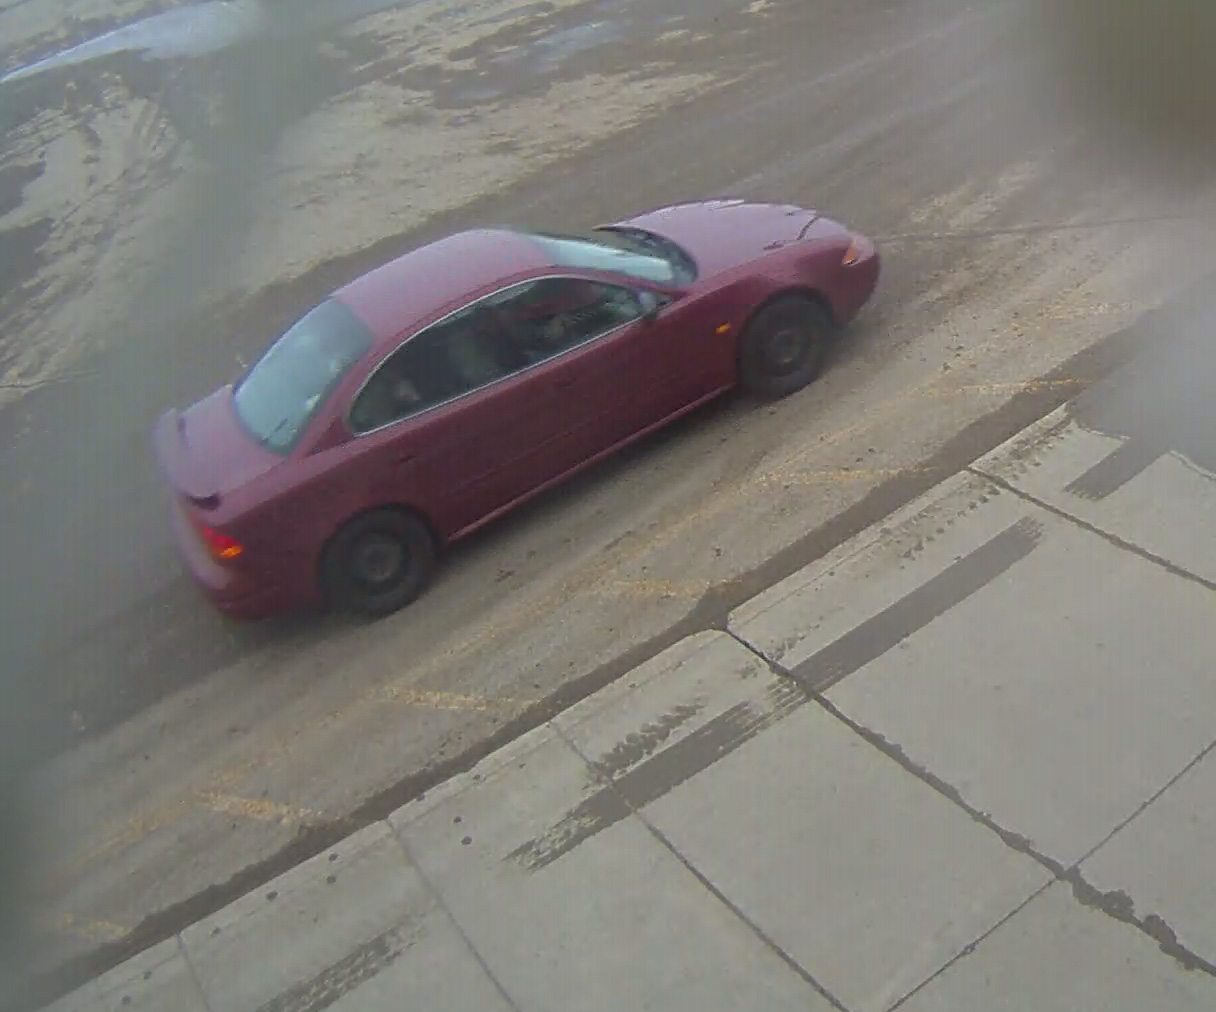 Suspect vehicle in theft.